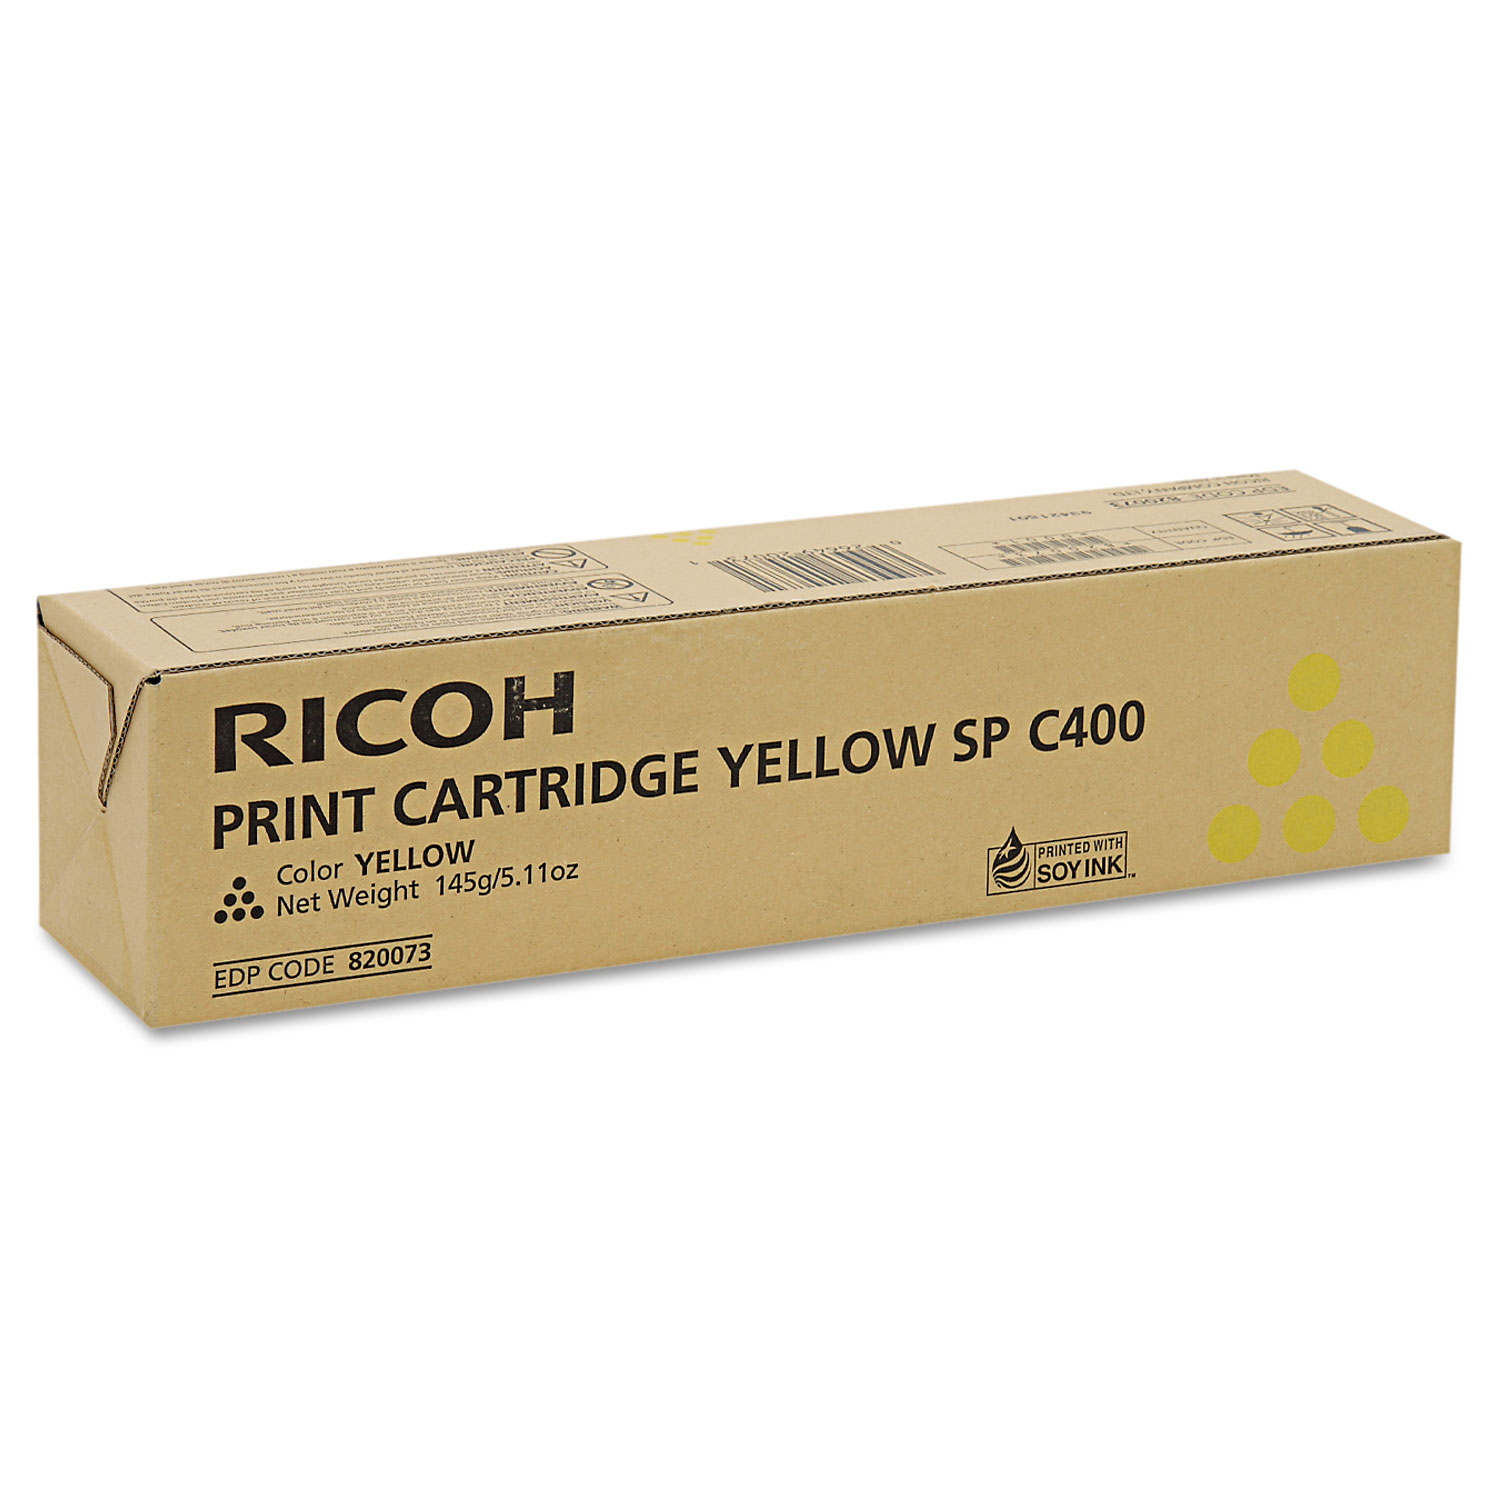 Ricoh 820073 Toner 6000 Page Yield Yellow - image 3 of 3